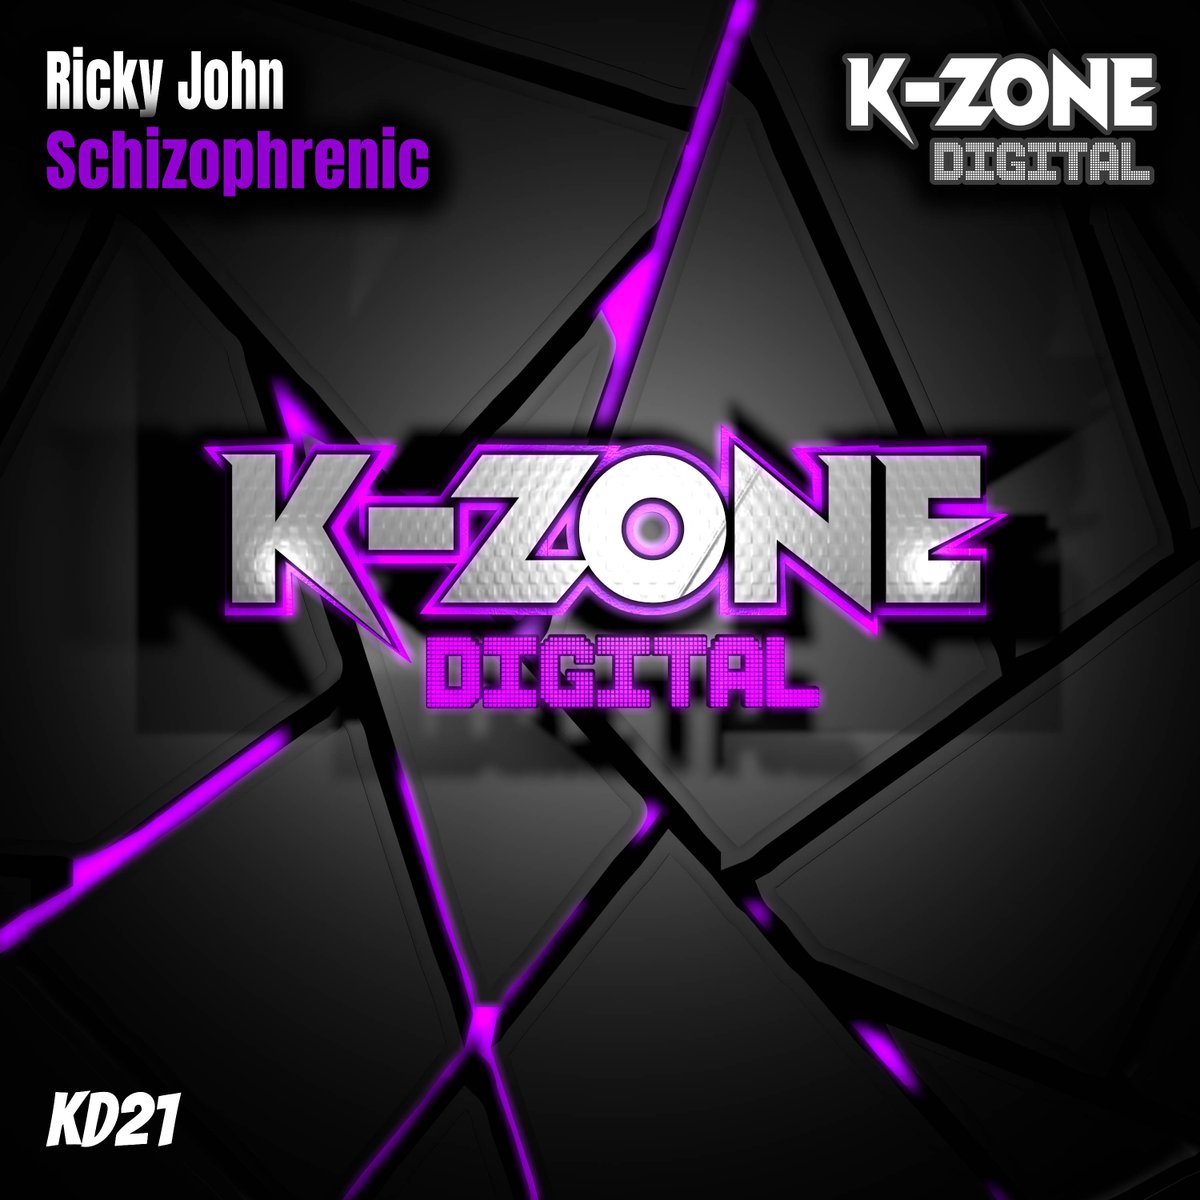 K-Zone Digital are back with a brand new release today from Ricky John is out now.

Check out 'Schizophrenic' and the labels other releases here:
bit.ly/schizophrenick…

#hardhouse #harddance #toolboxdigital #newrelease #newmusic #kzonedigital